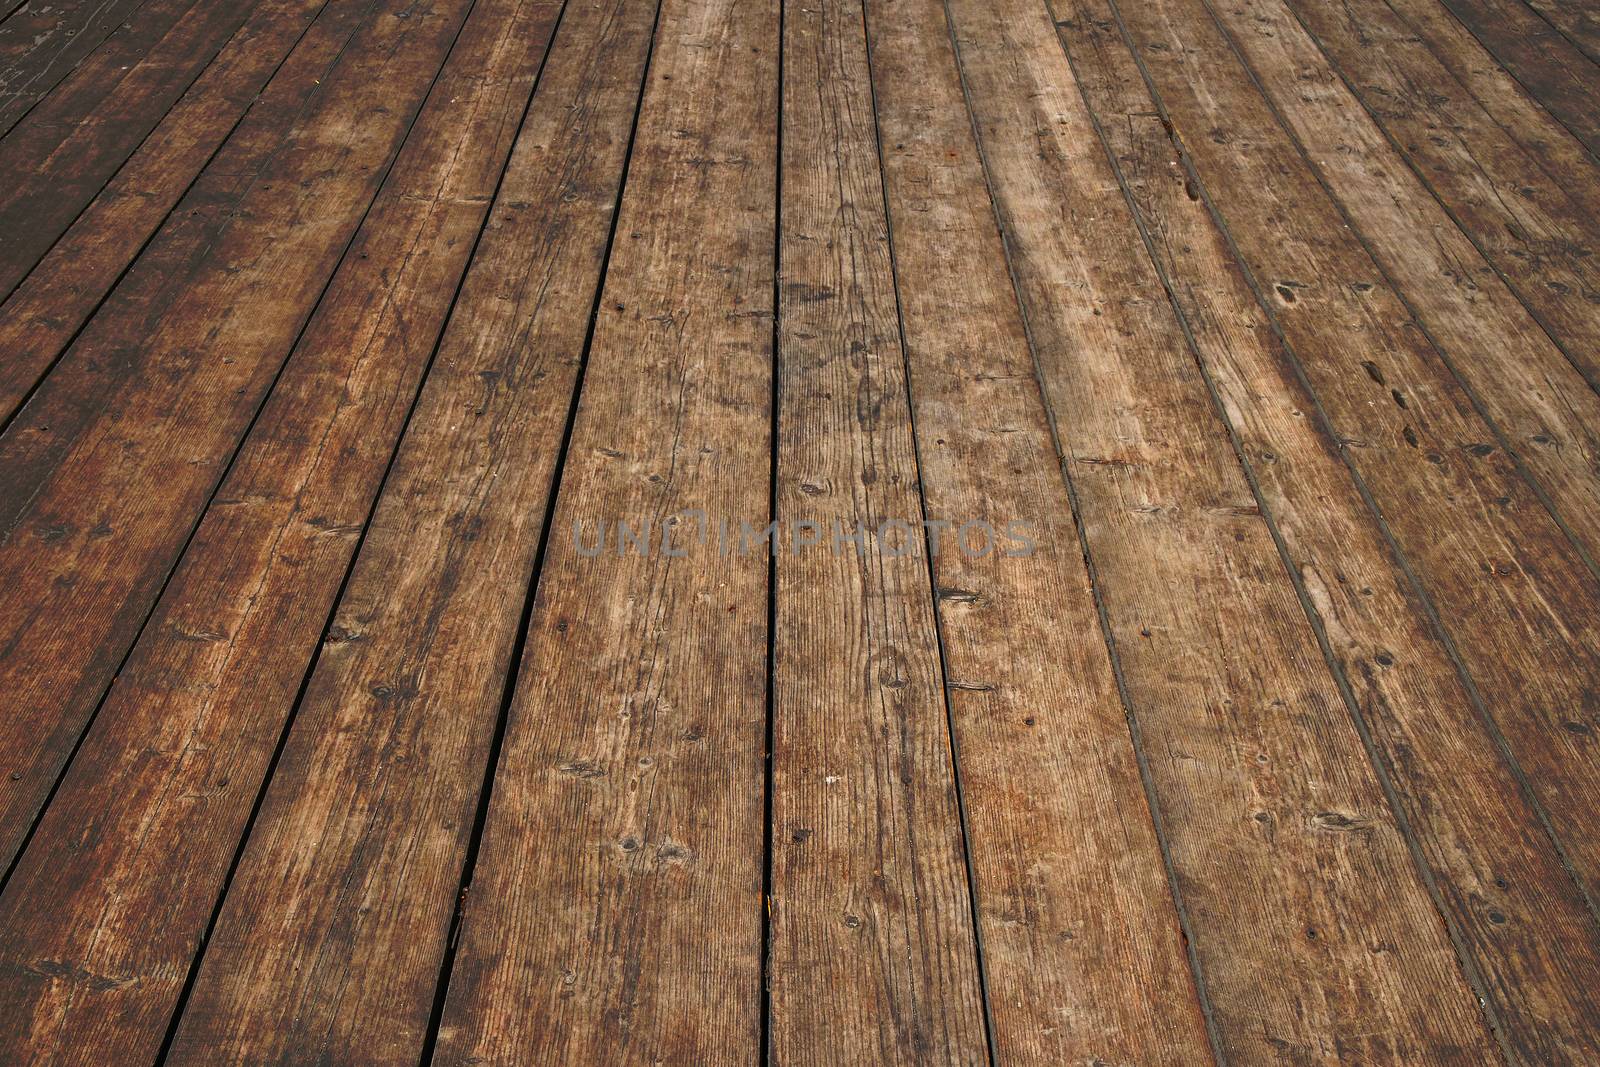 Vintage wooden surface with planks and gaps in perspective by BreakingTheWalls